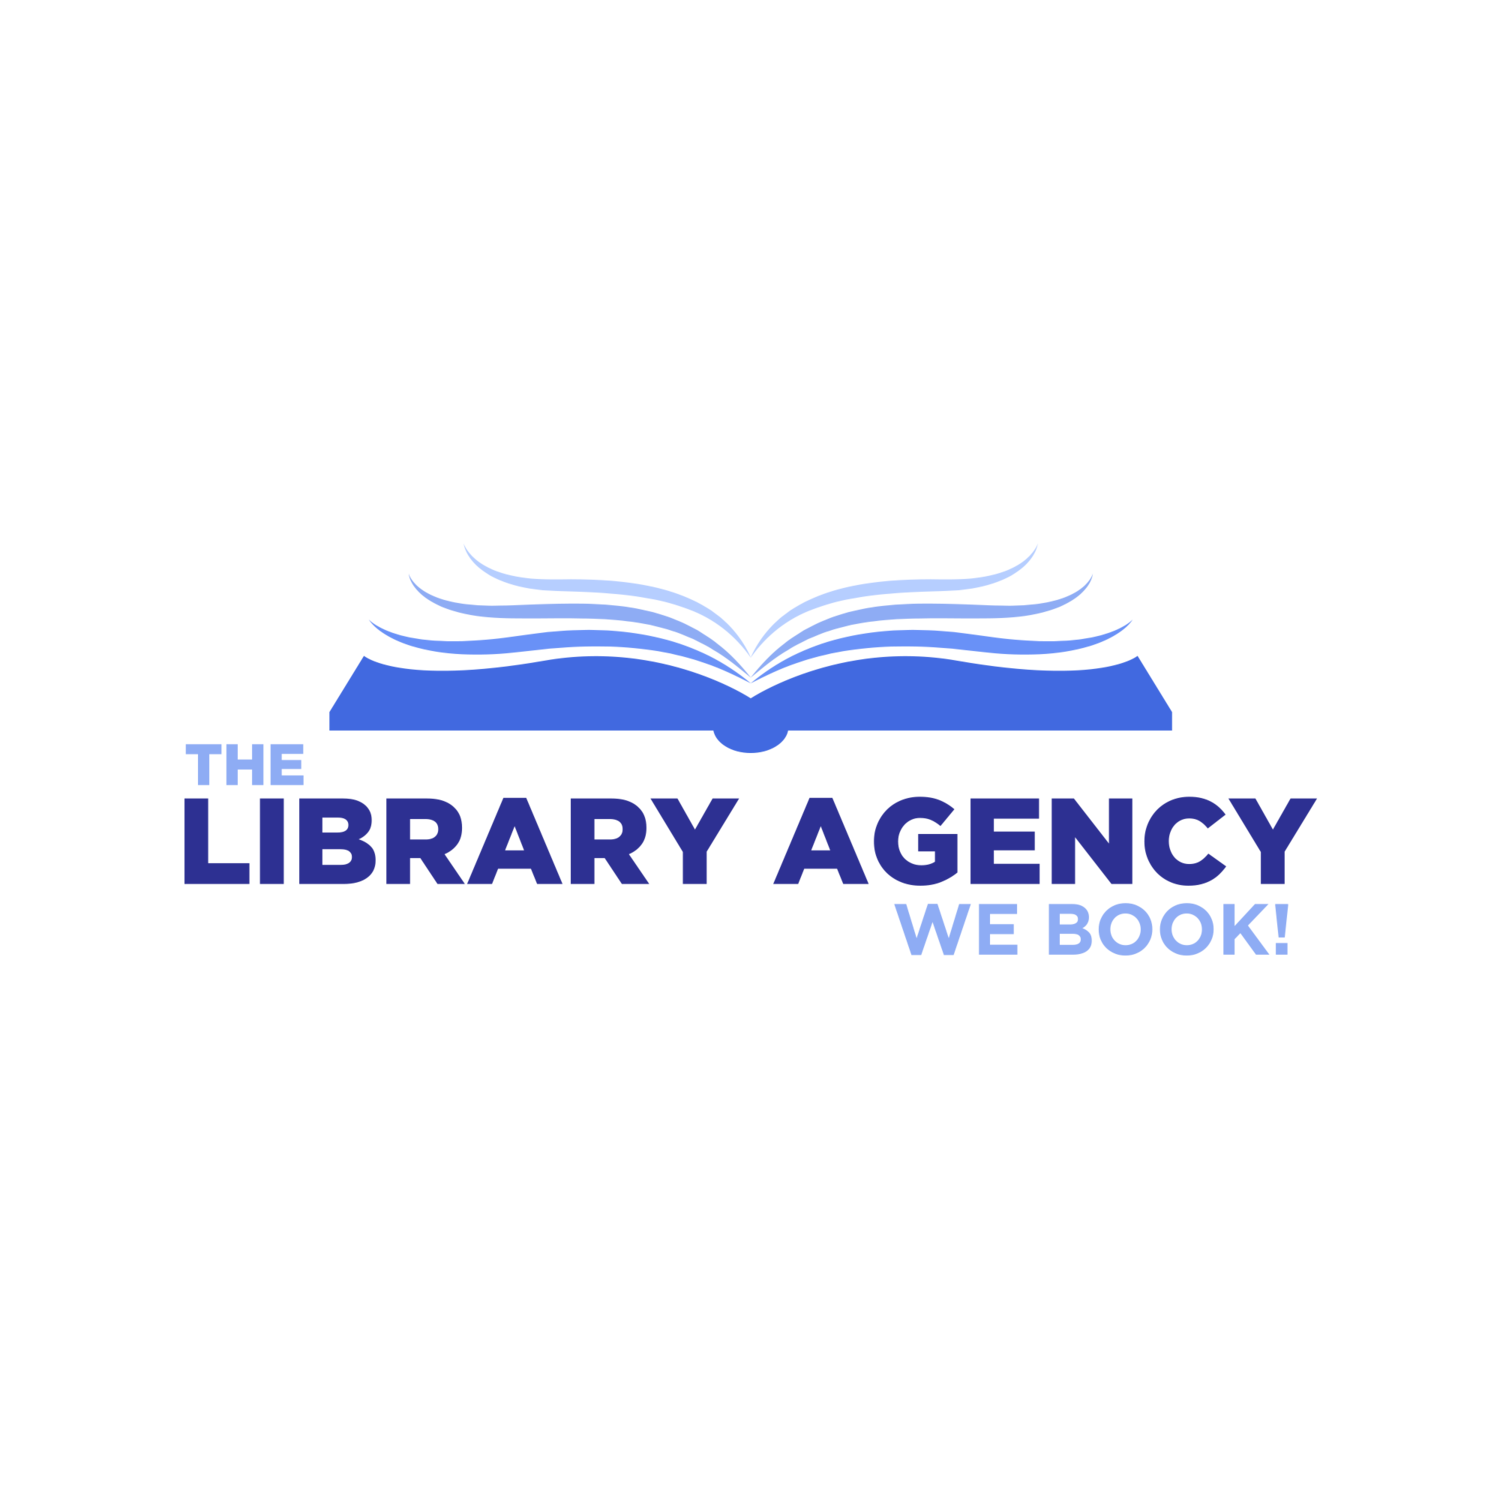 The Library Agency